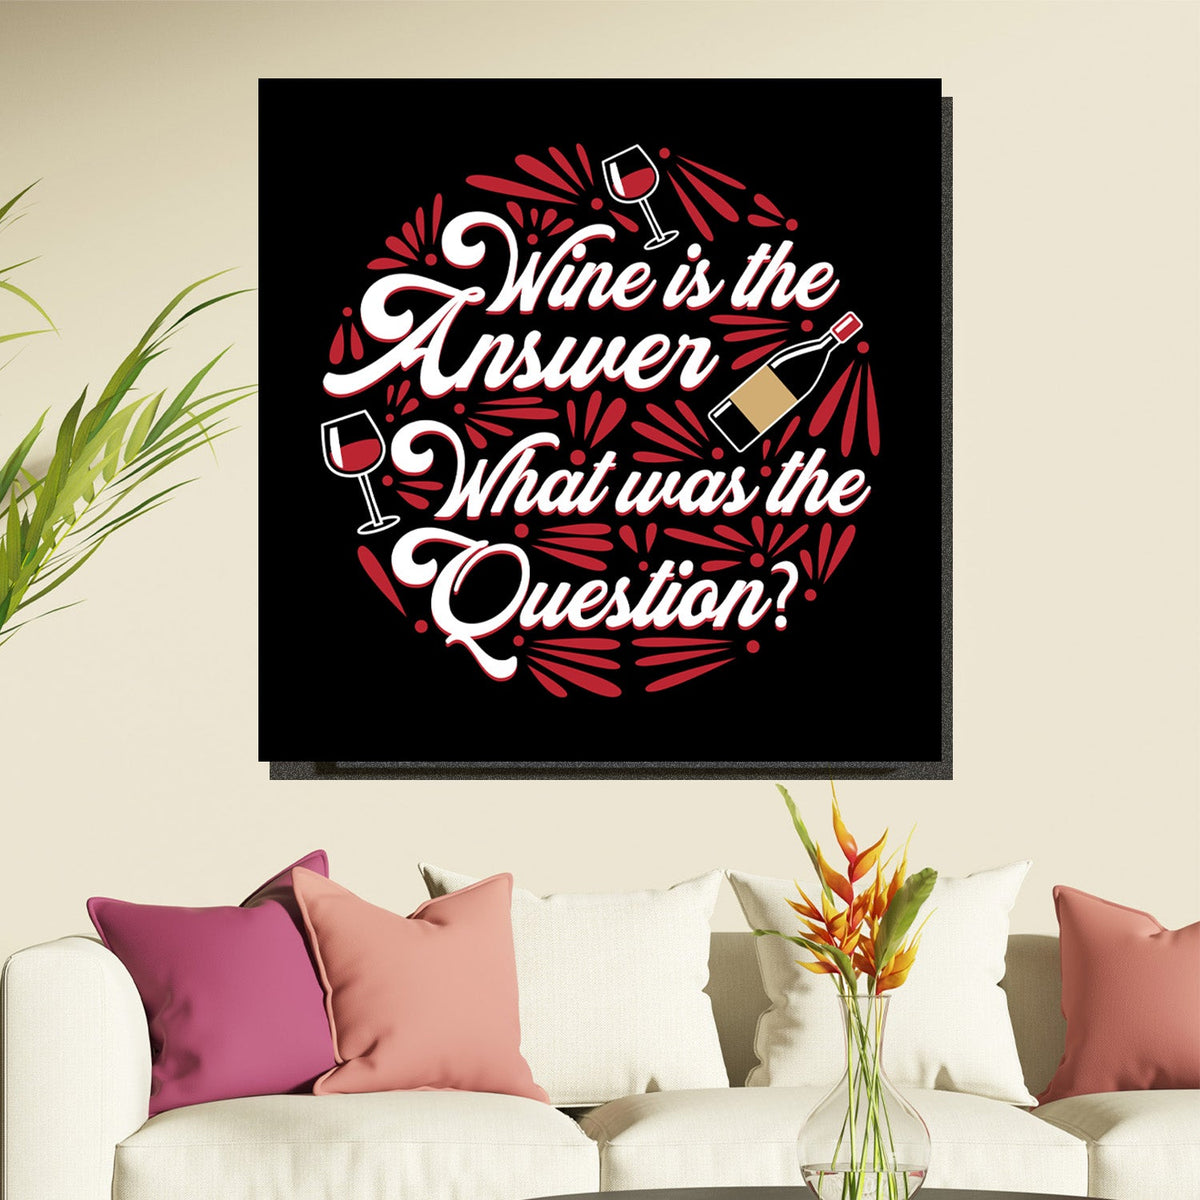 https://cdn.shopify.com/s/files/1/0387/9986/8044/products/WineistheAnswerCanvasArtprintStretched-4.jpg